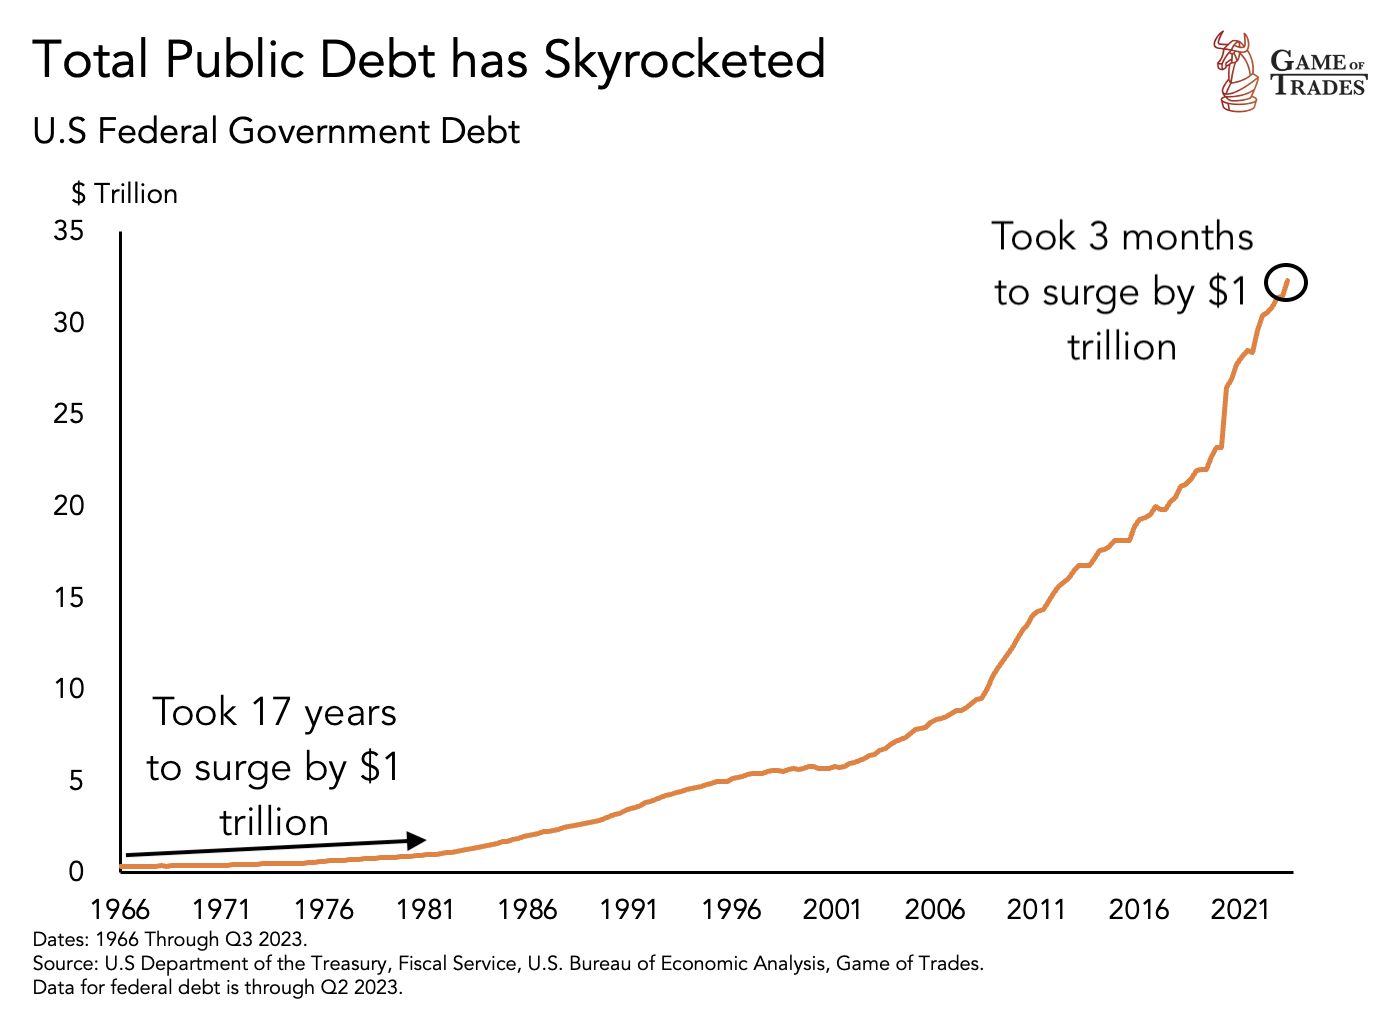 US federal government debt